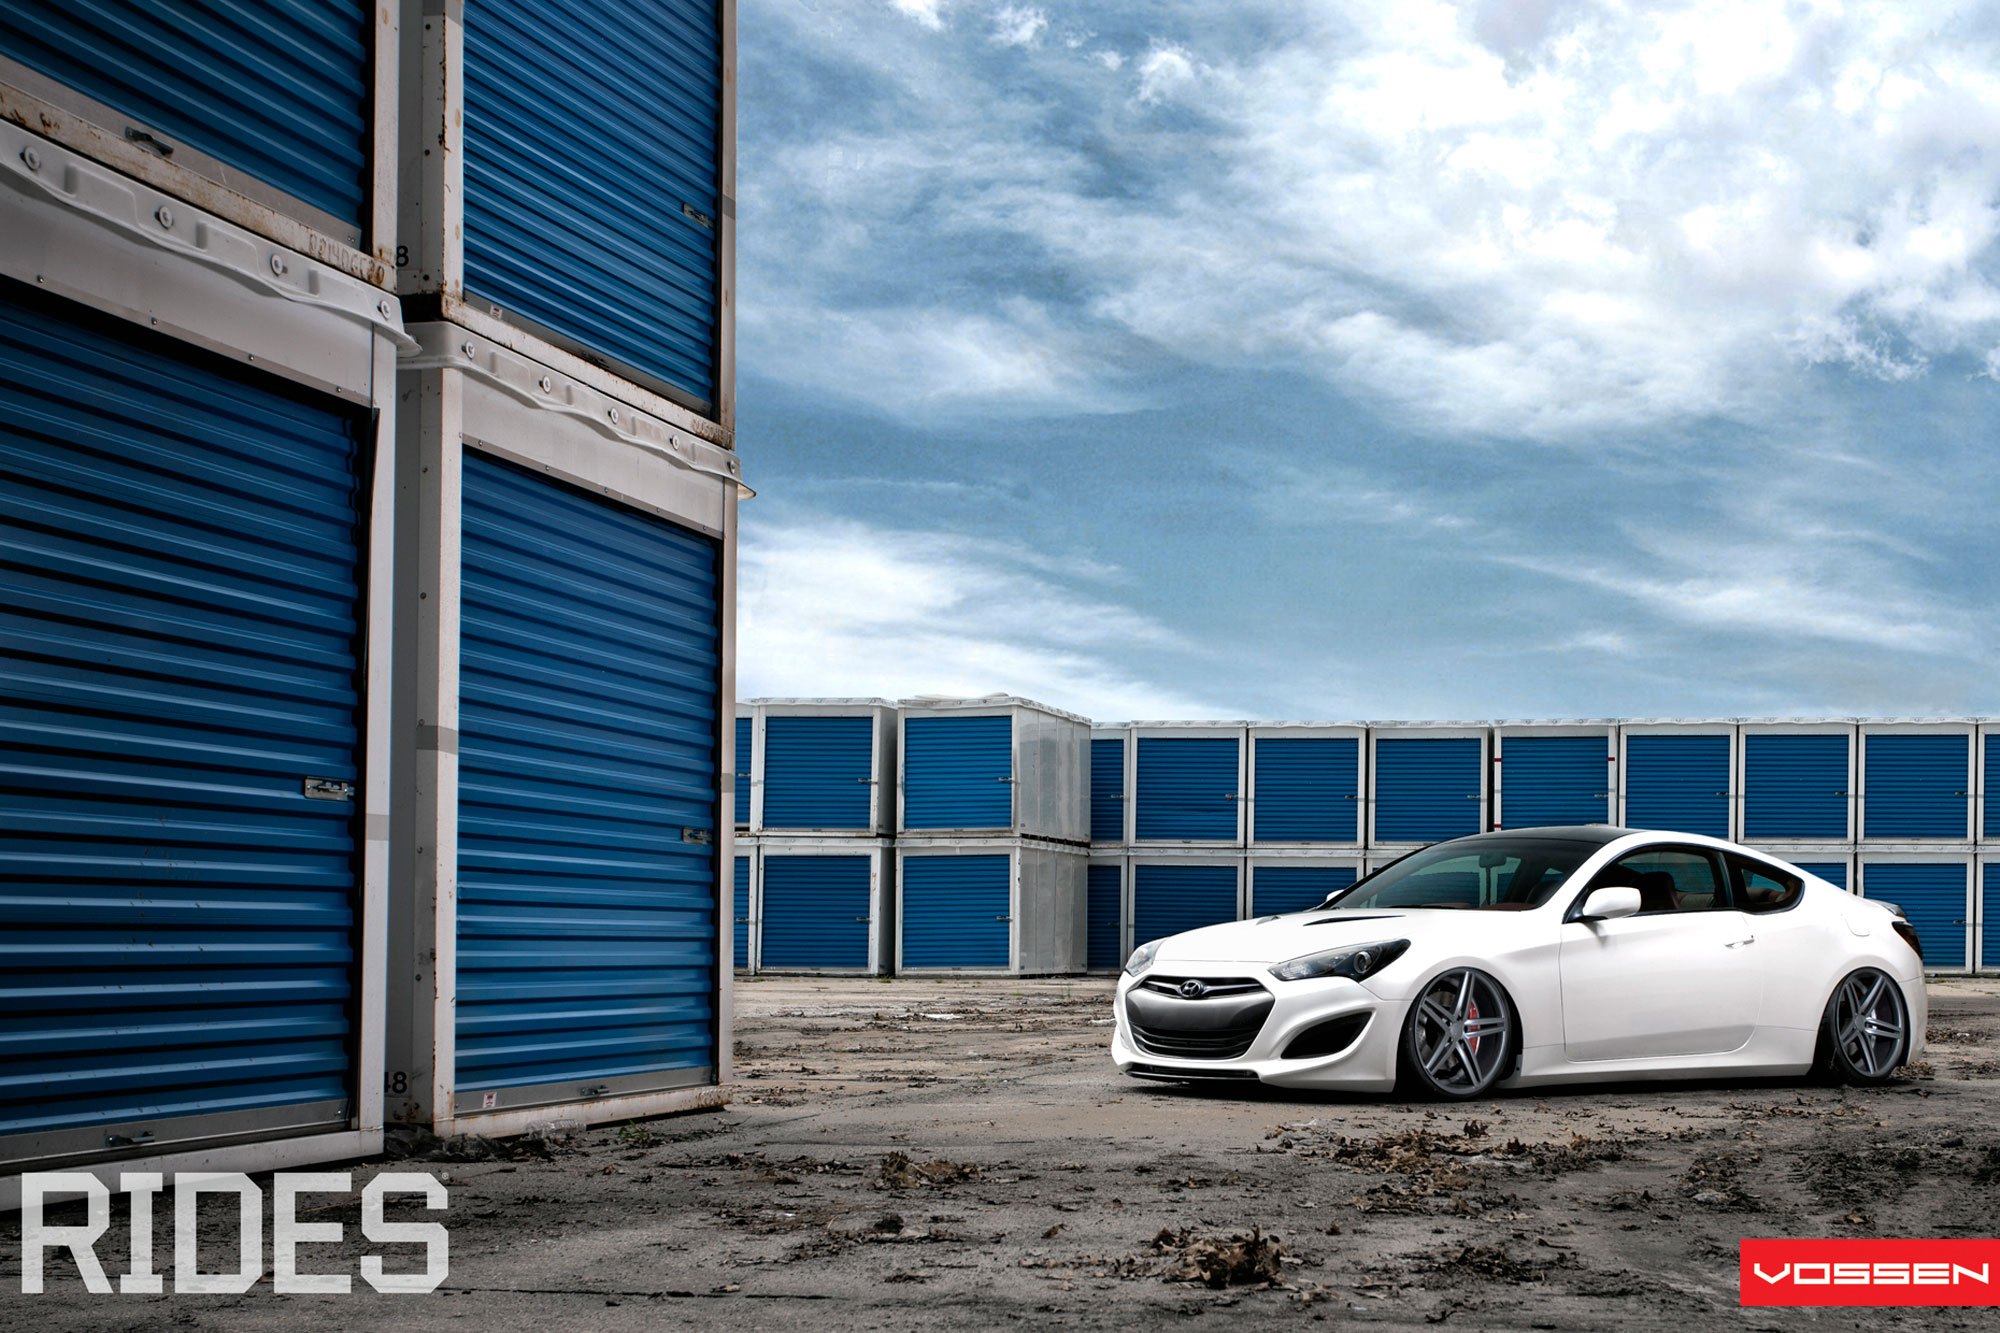 White Hyundai Genesis Coupe with Custom Black Grille - Photo by Vossen